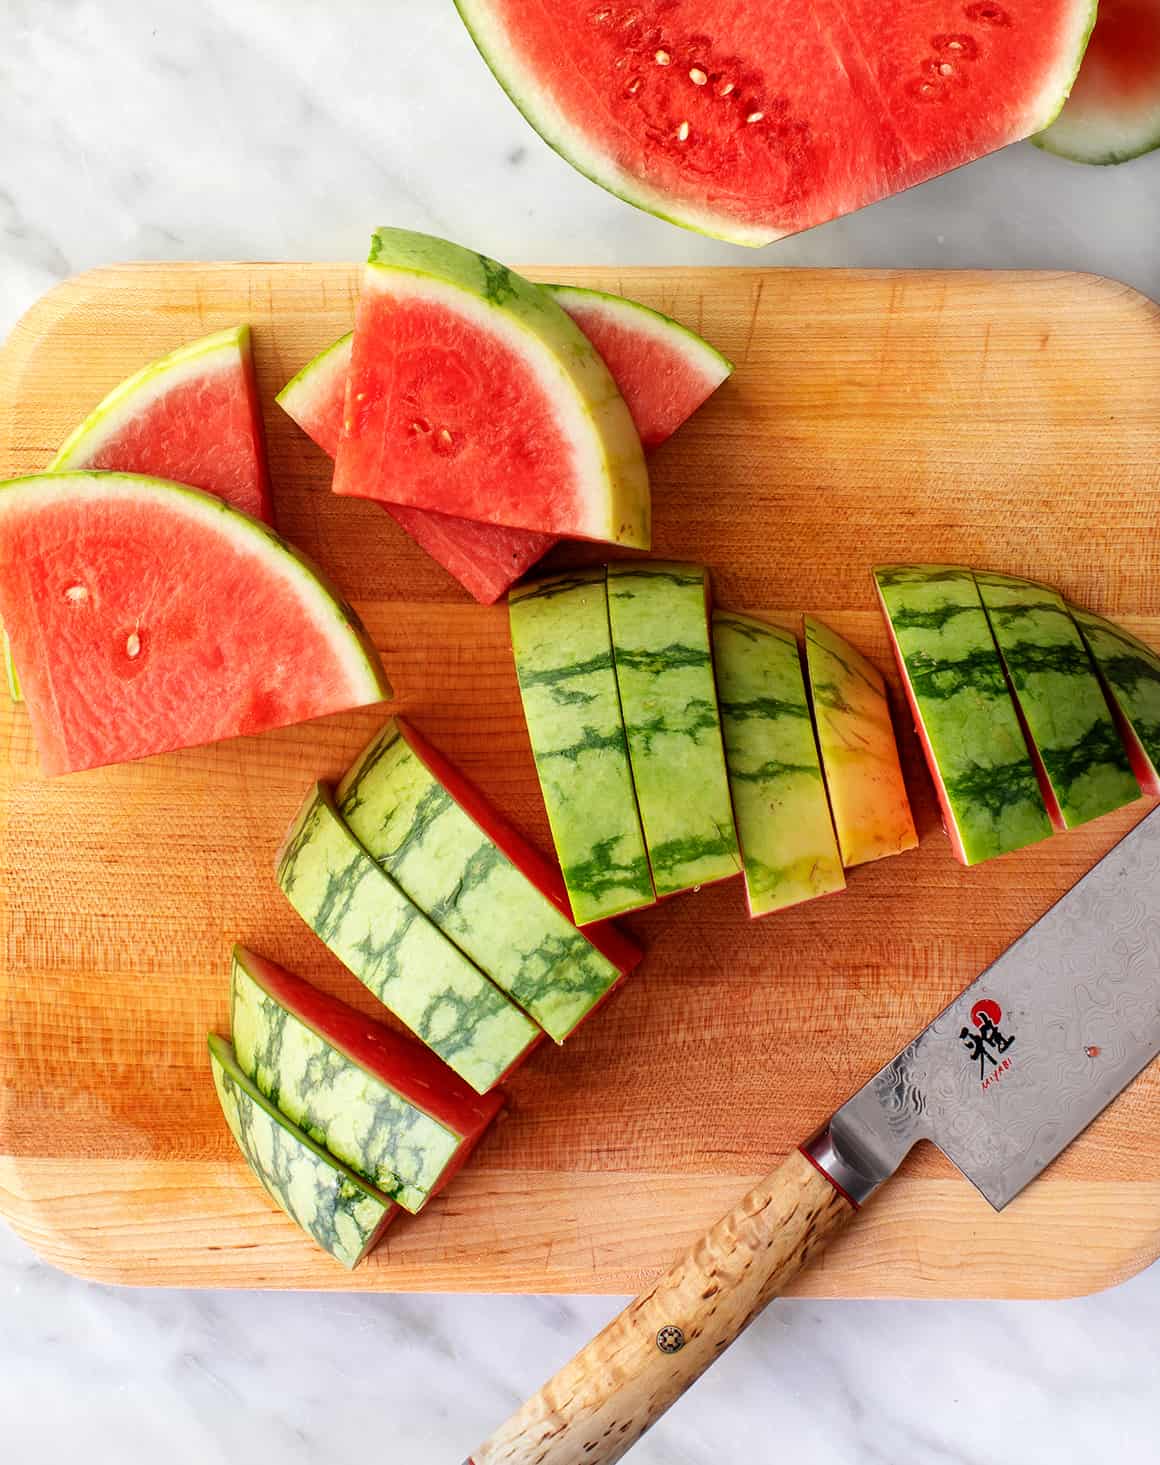 Best way to cut a watermelon - wedges on a cutting board with knife